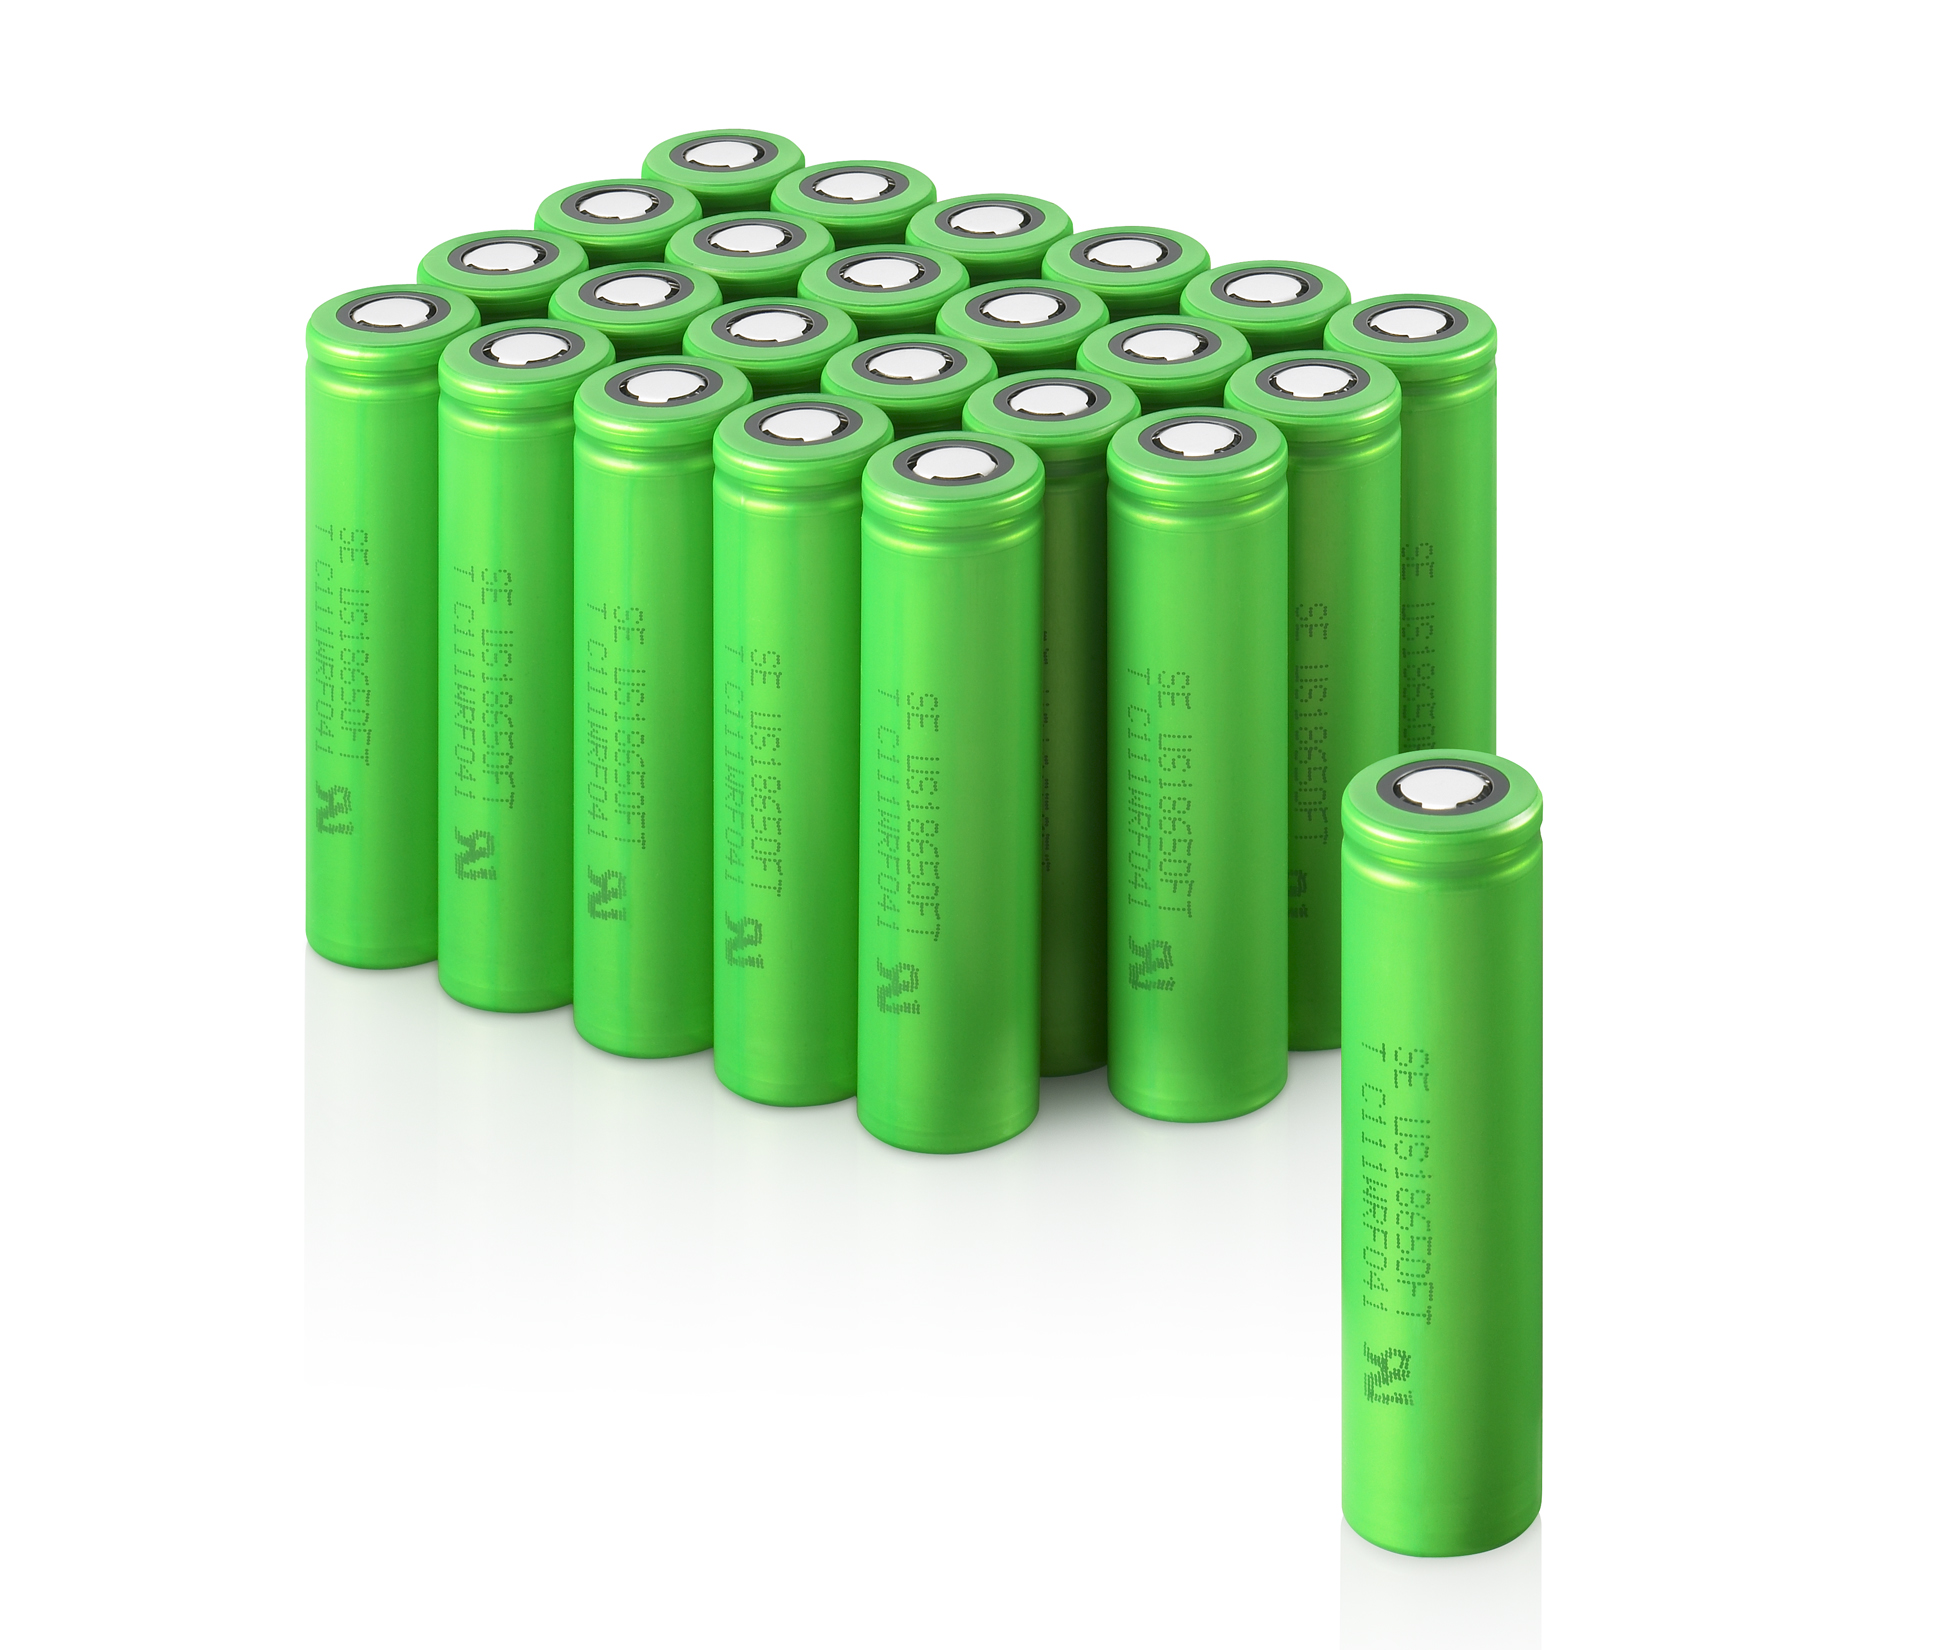 Keeping the Battery Supply Chain Flowing